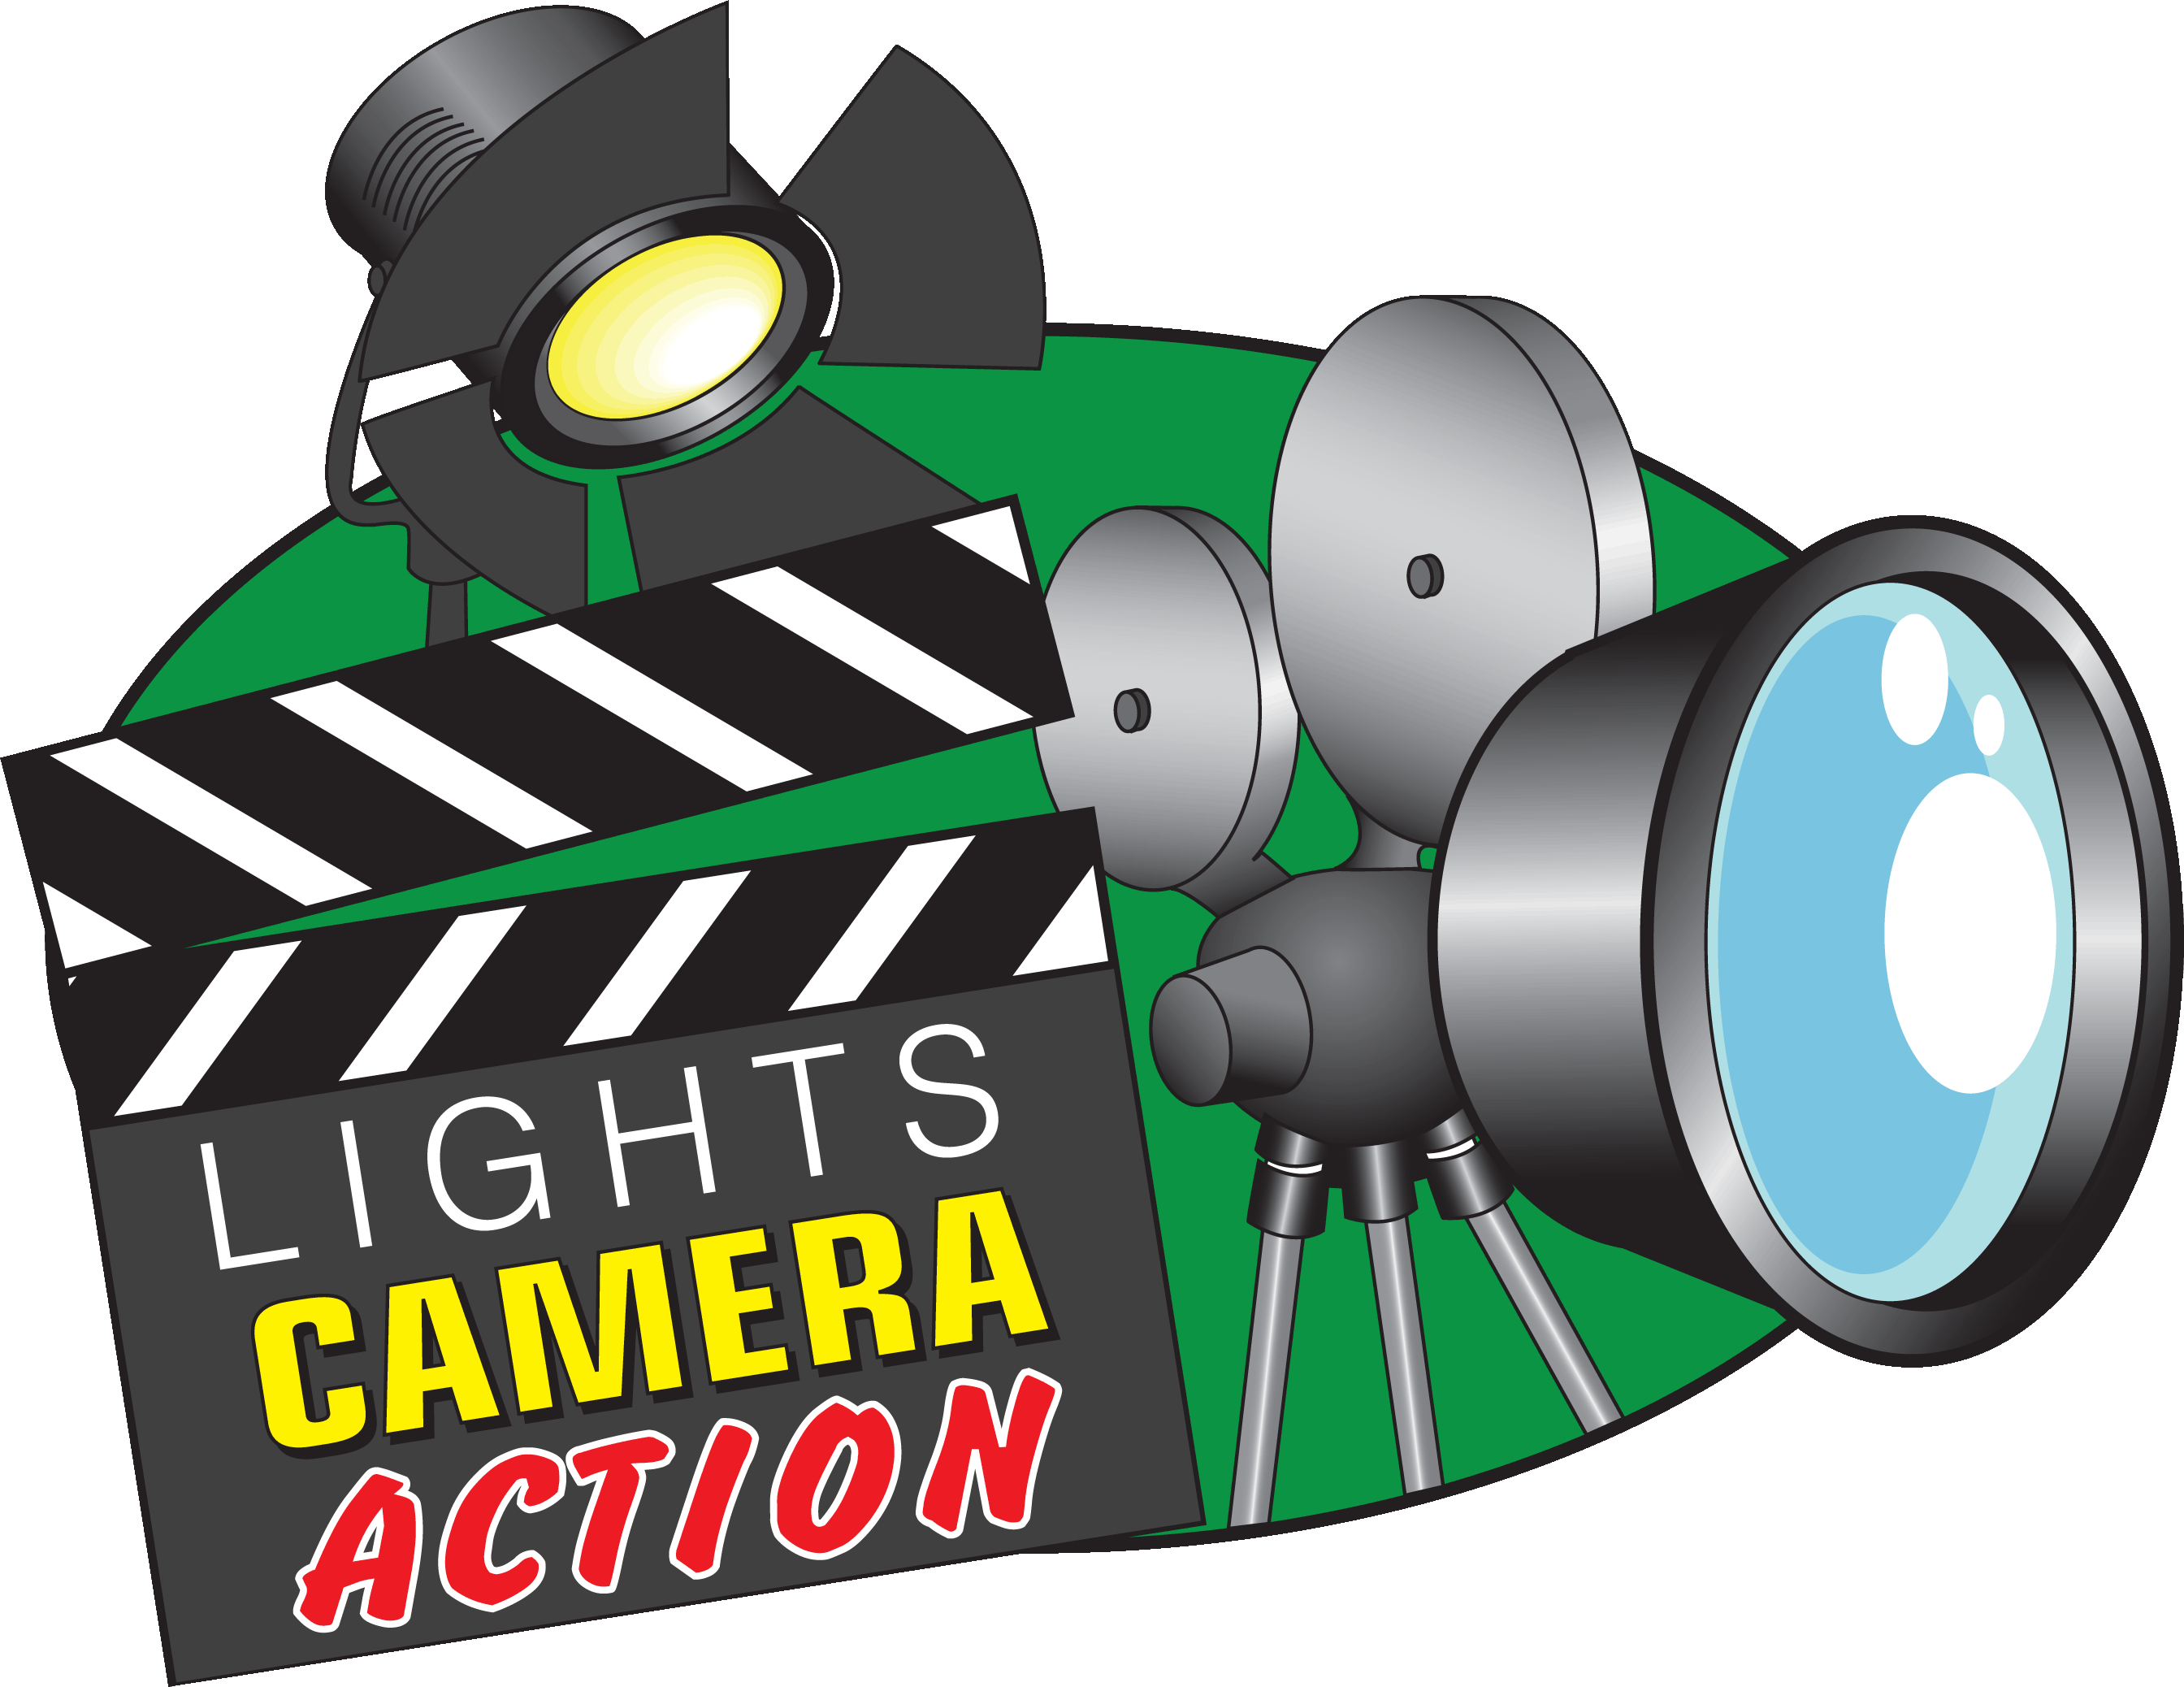 Free Lights Camera Action, Download Free Clip Art, Free Clip.